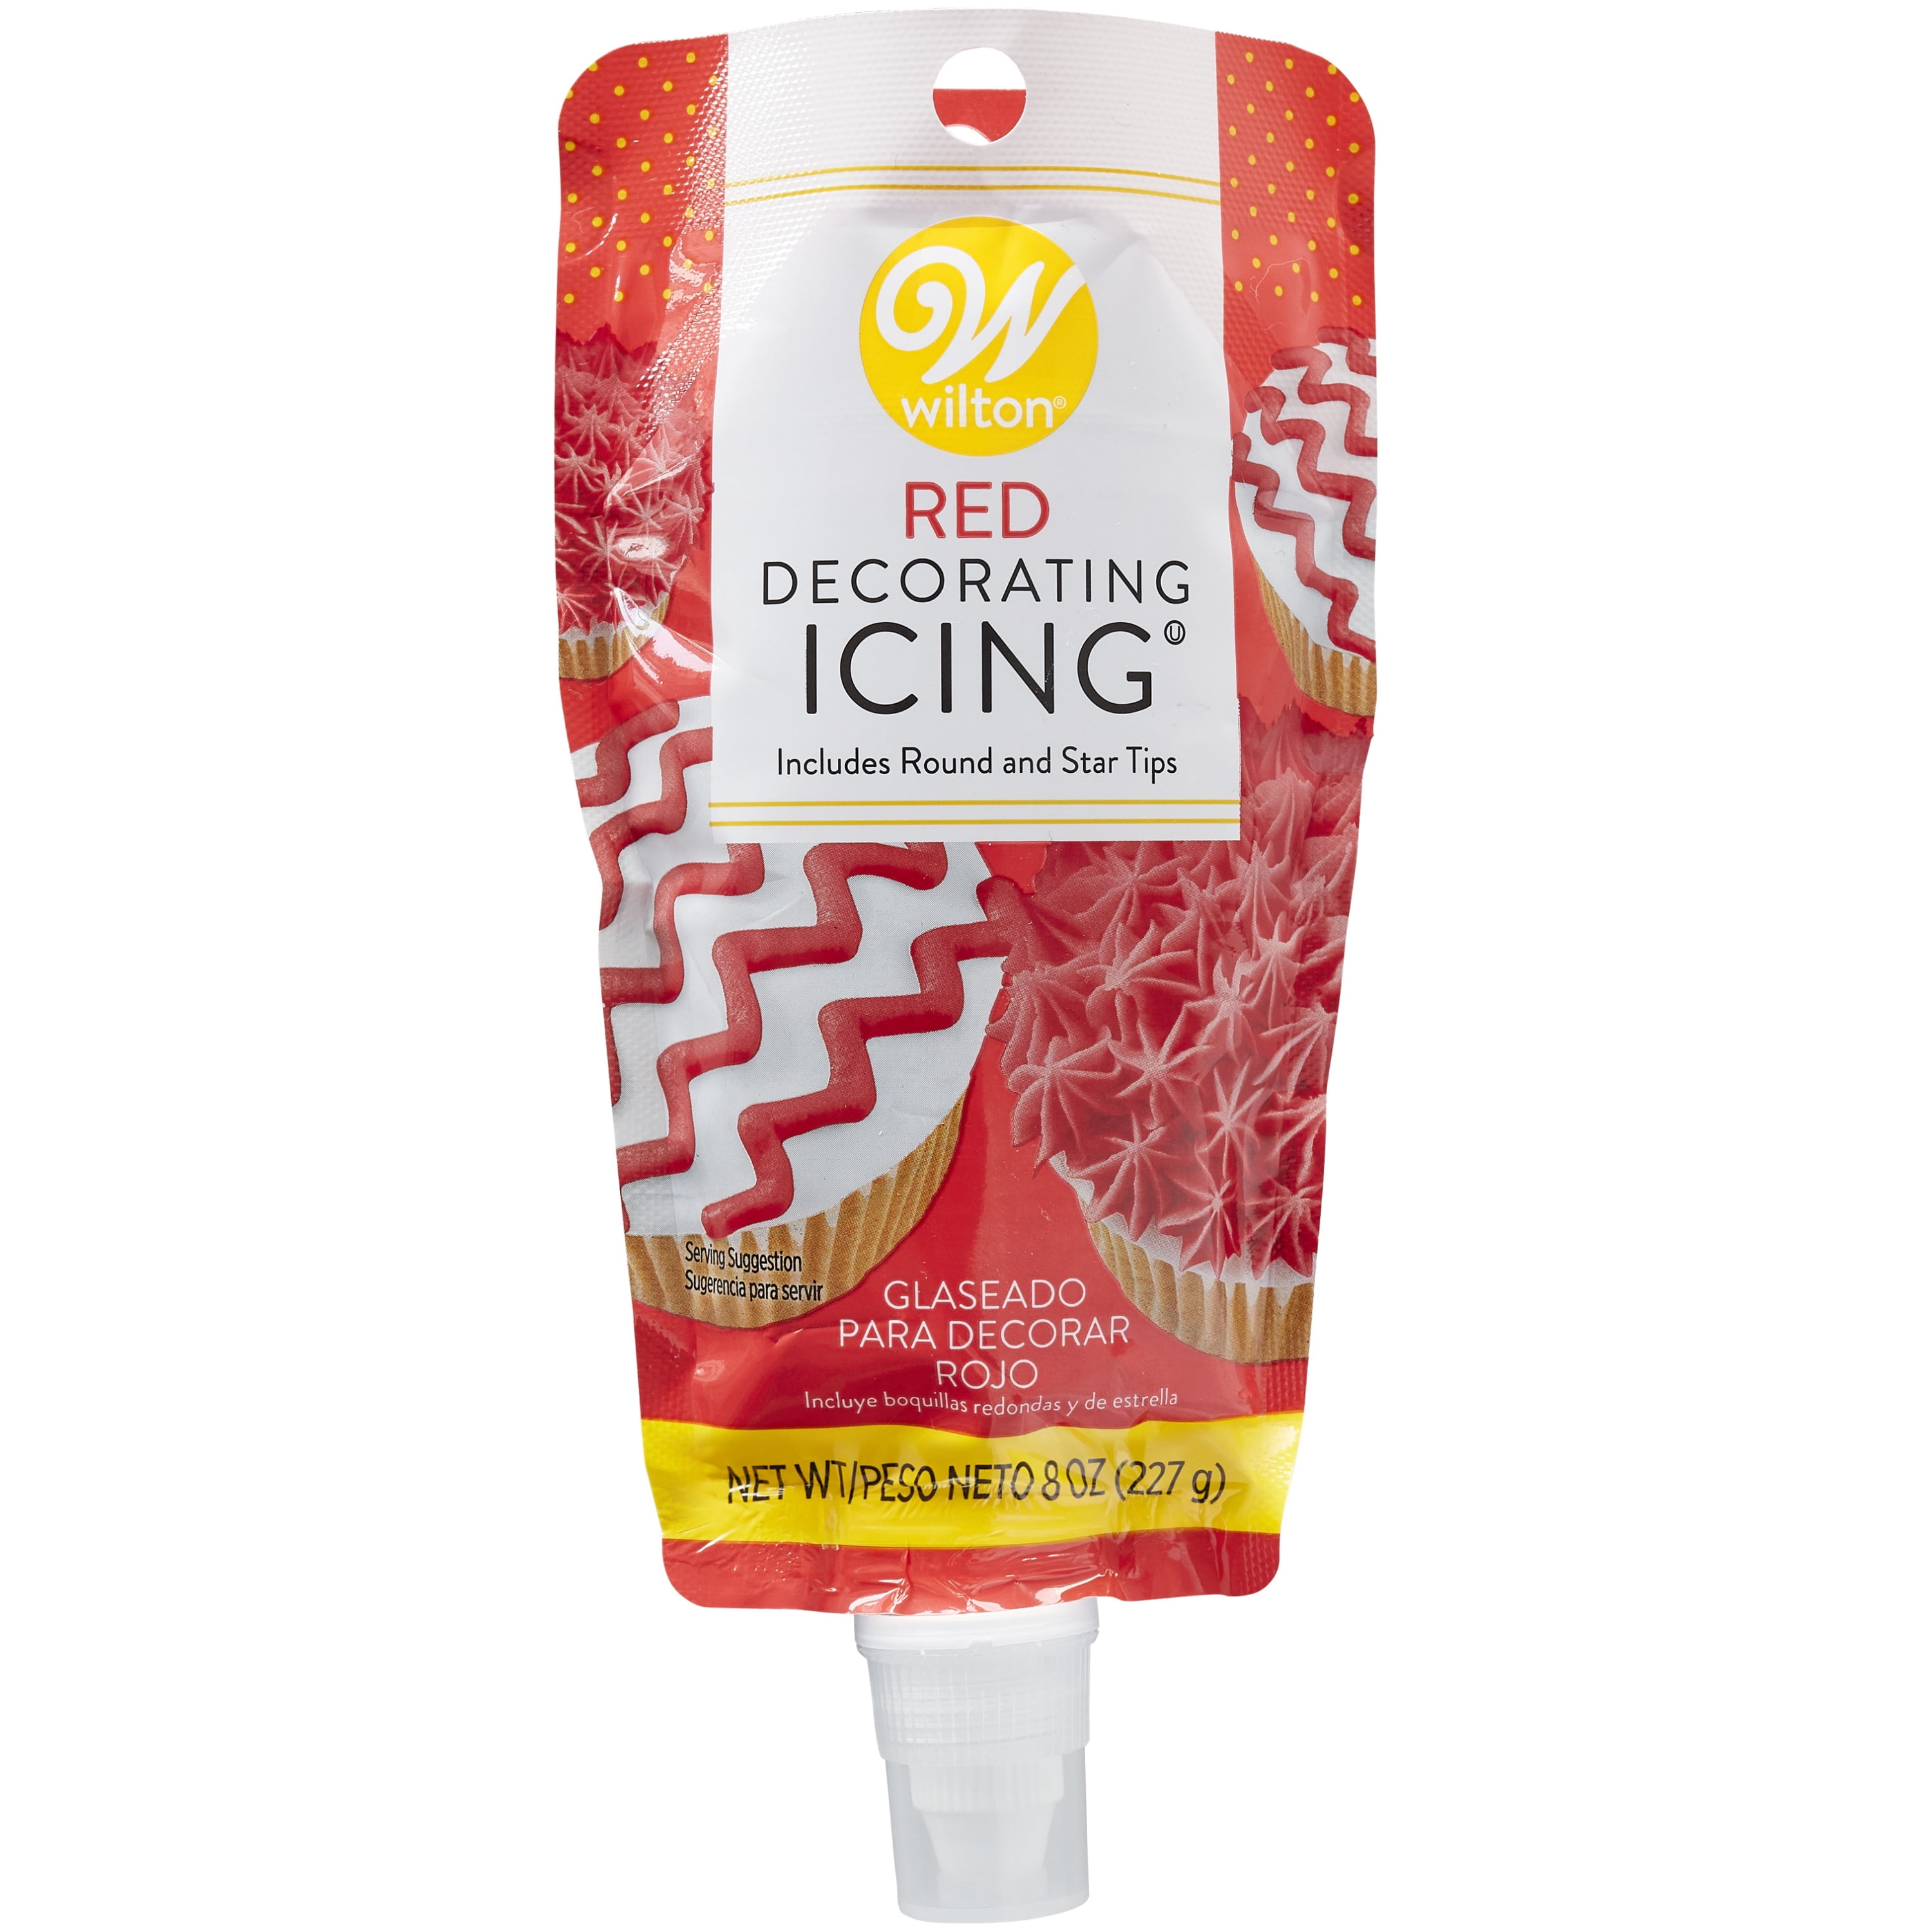 Wilton Ready-to-Use Red Vanilla-Flavored Icing Pouch with Tips, 8 oz.